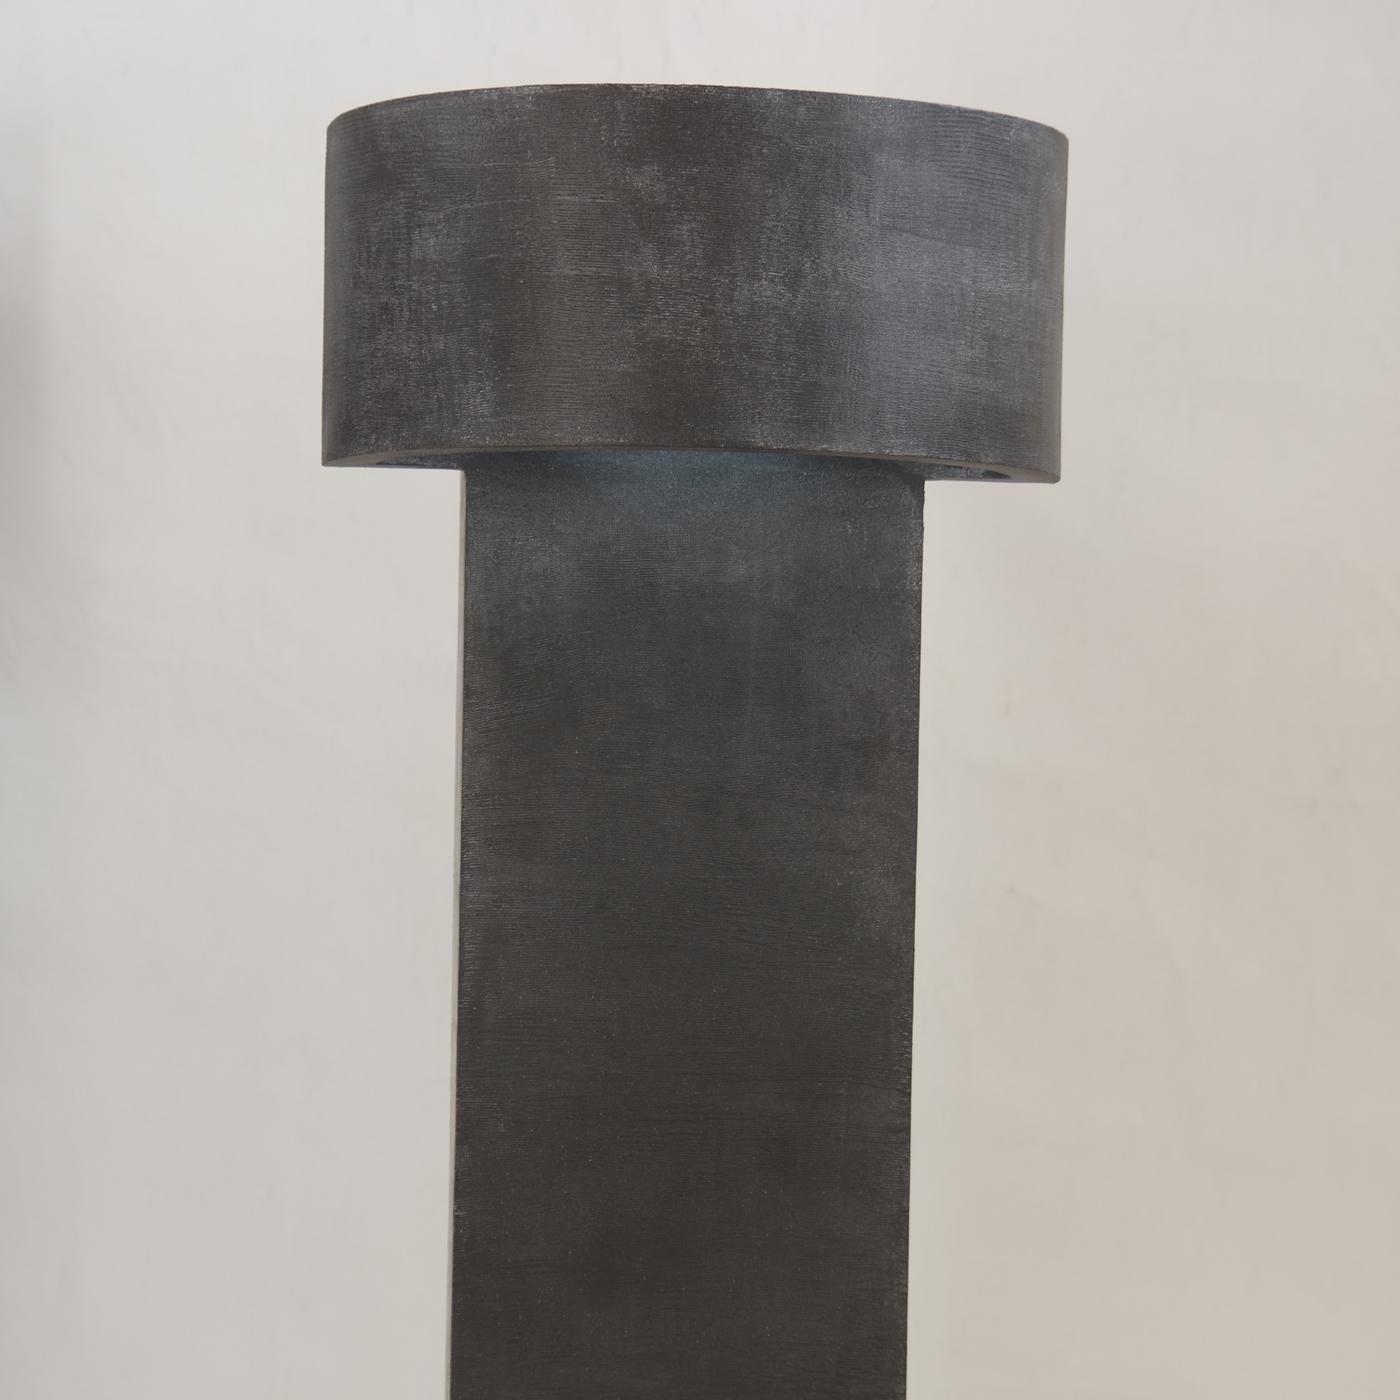 Part of the Monolith series, this lamp is defined by sleek lines and imposing proportions. Handcrafted of wood with a dark finish, the tall, vertical base is topped by a semi-circular 